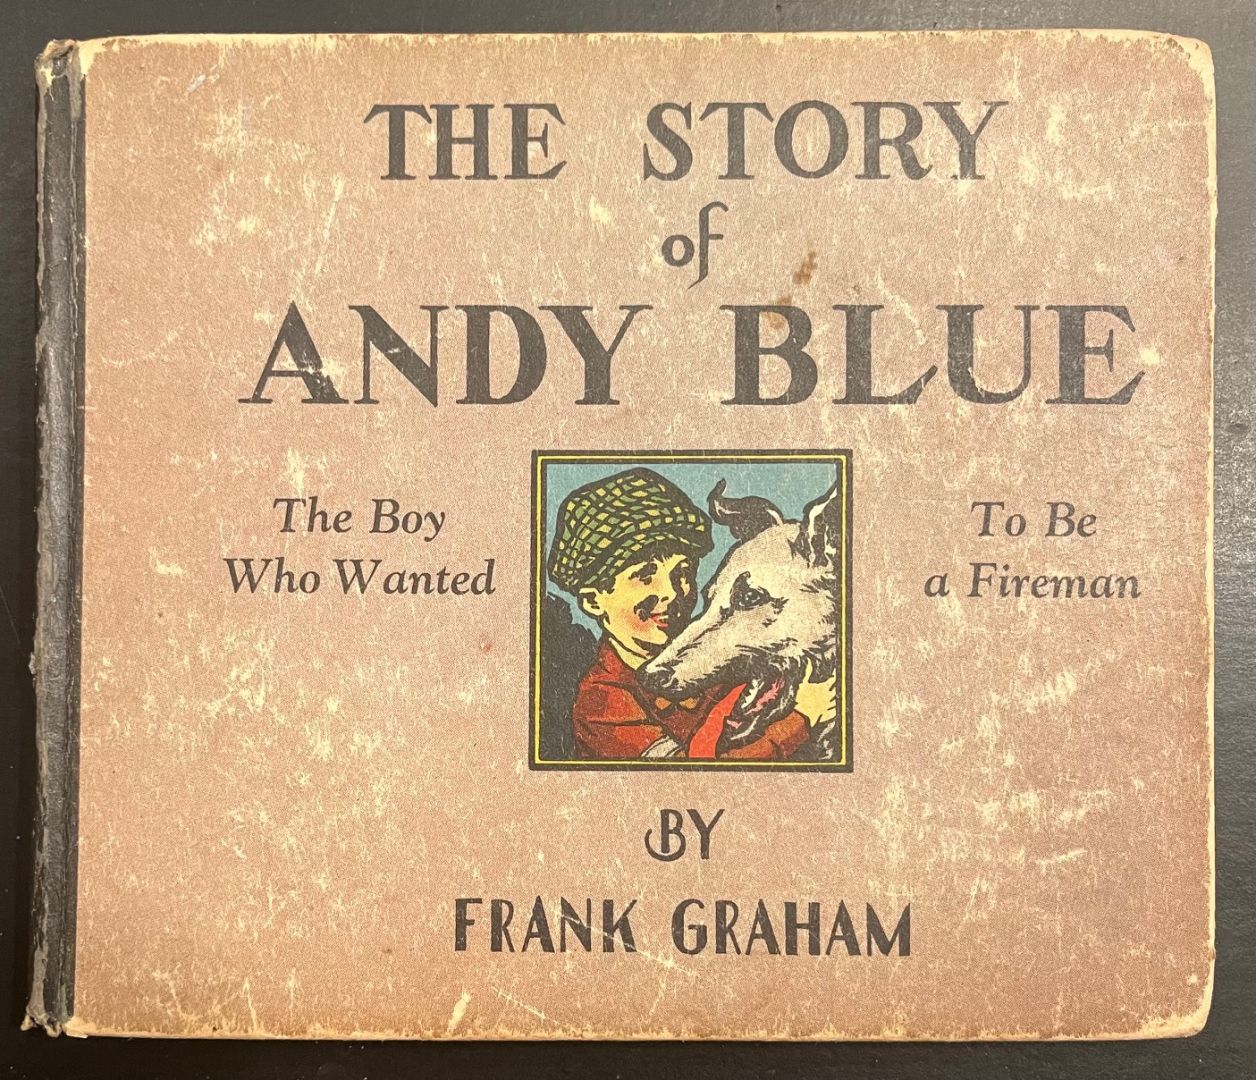 THE STORY OF ANDY BLUE - THE BOY WHO WANTED TO BE A FIREMAN